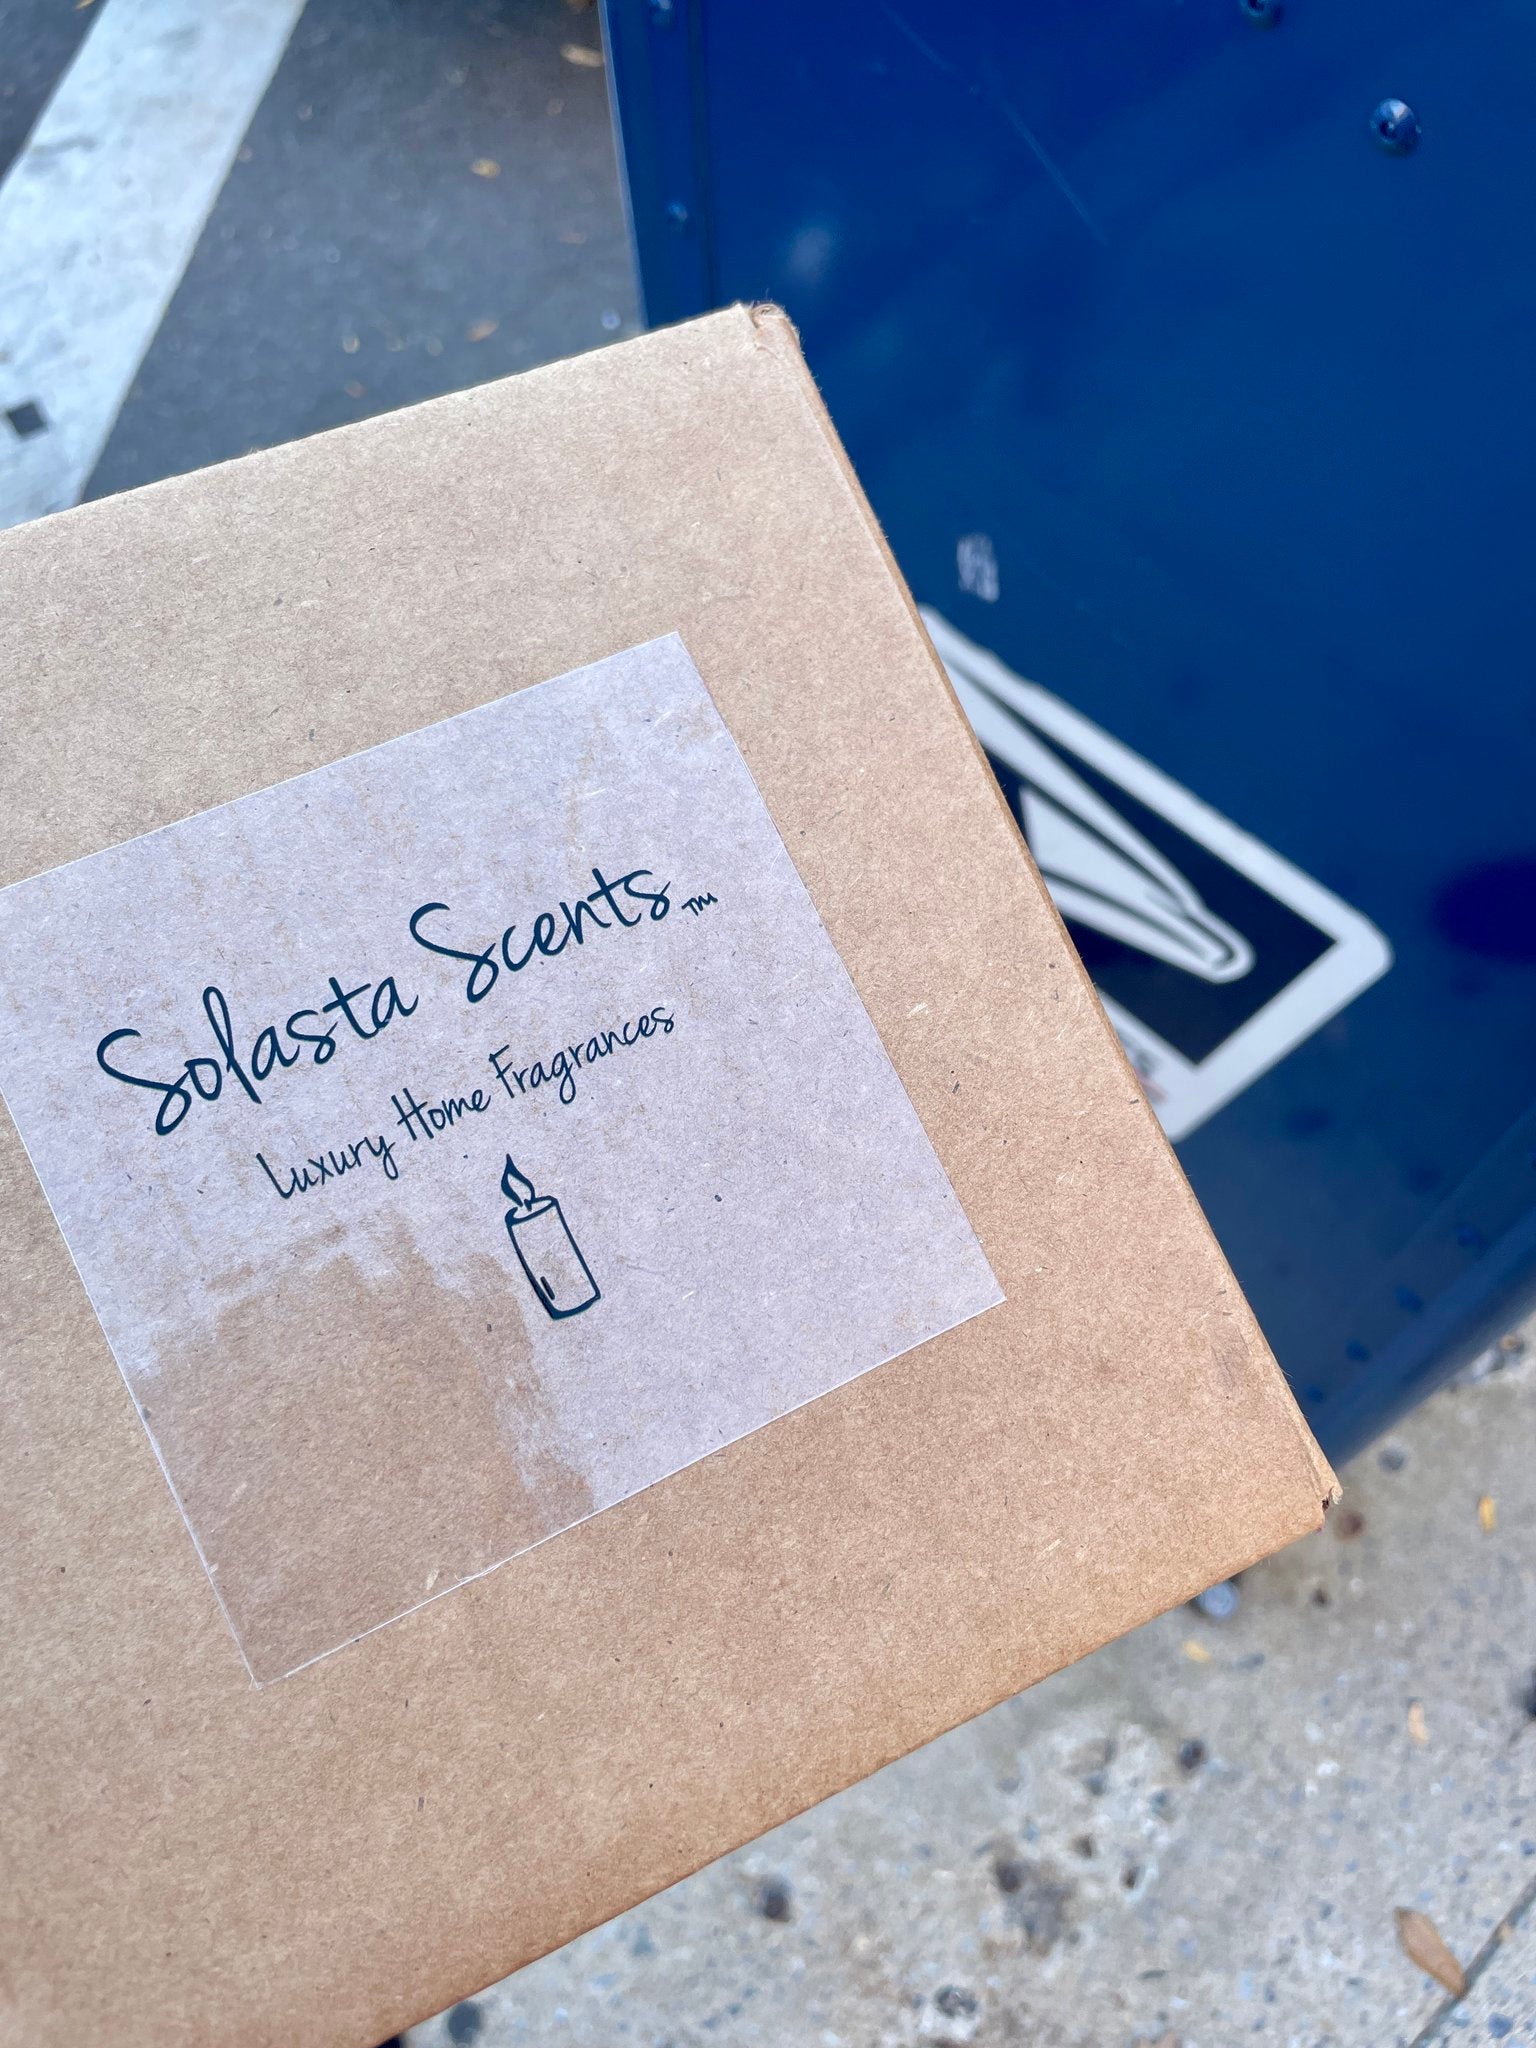 Solasta Scents® shipping package.